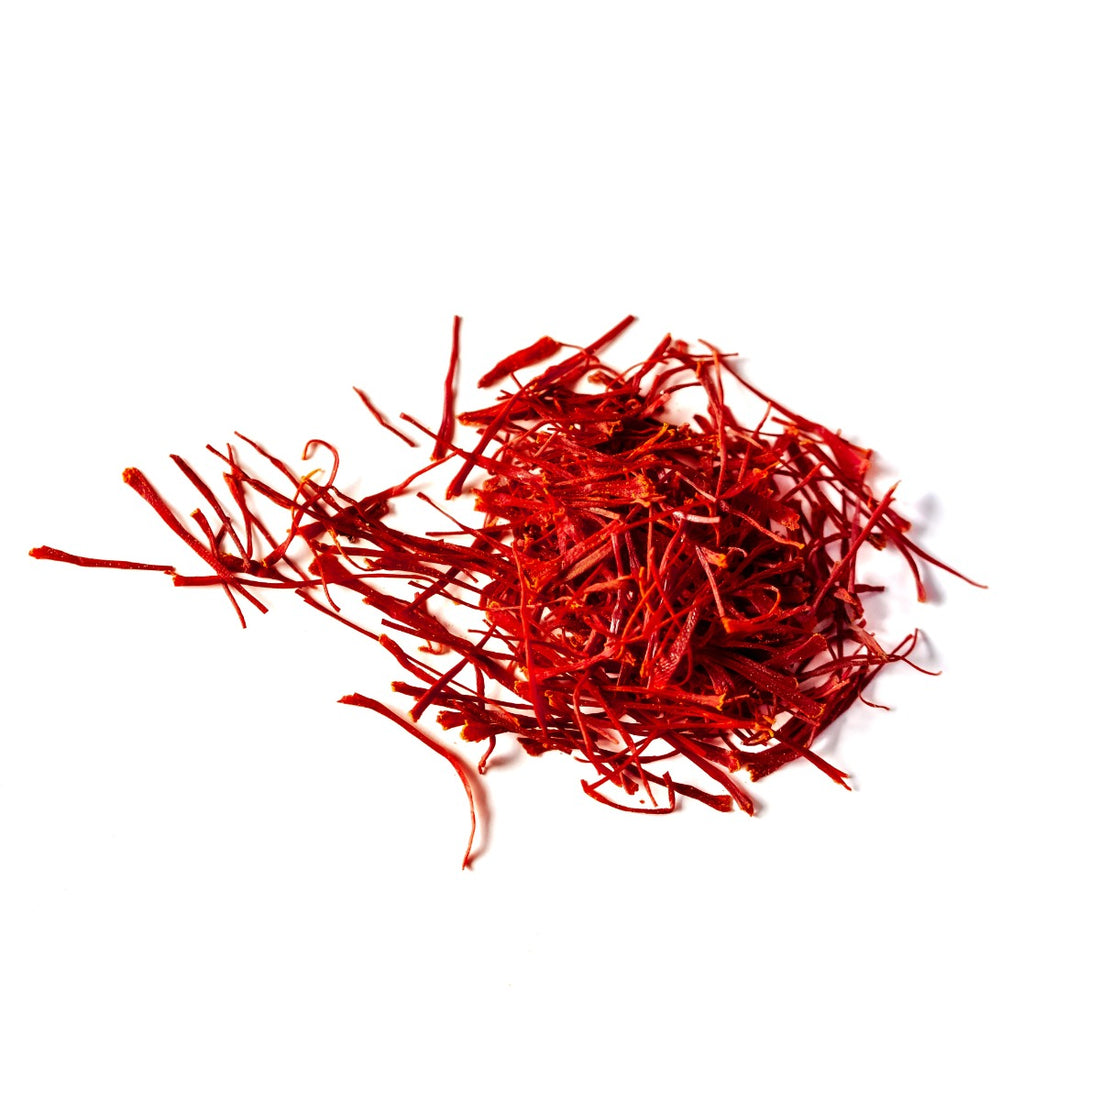 High-quality, authentic, and sustainably sourced Saffron from Afghanistan